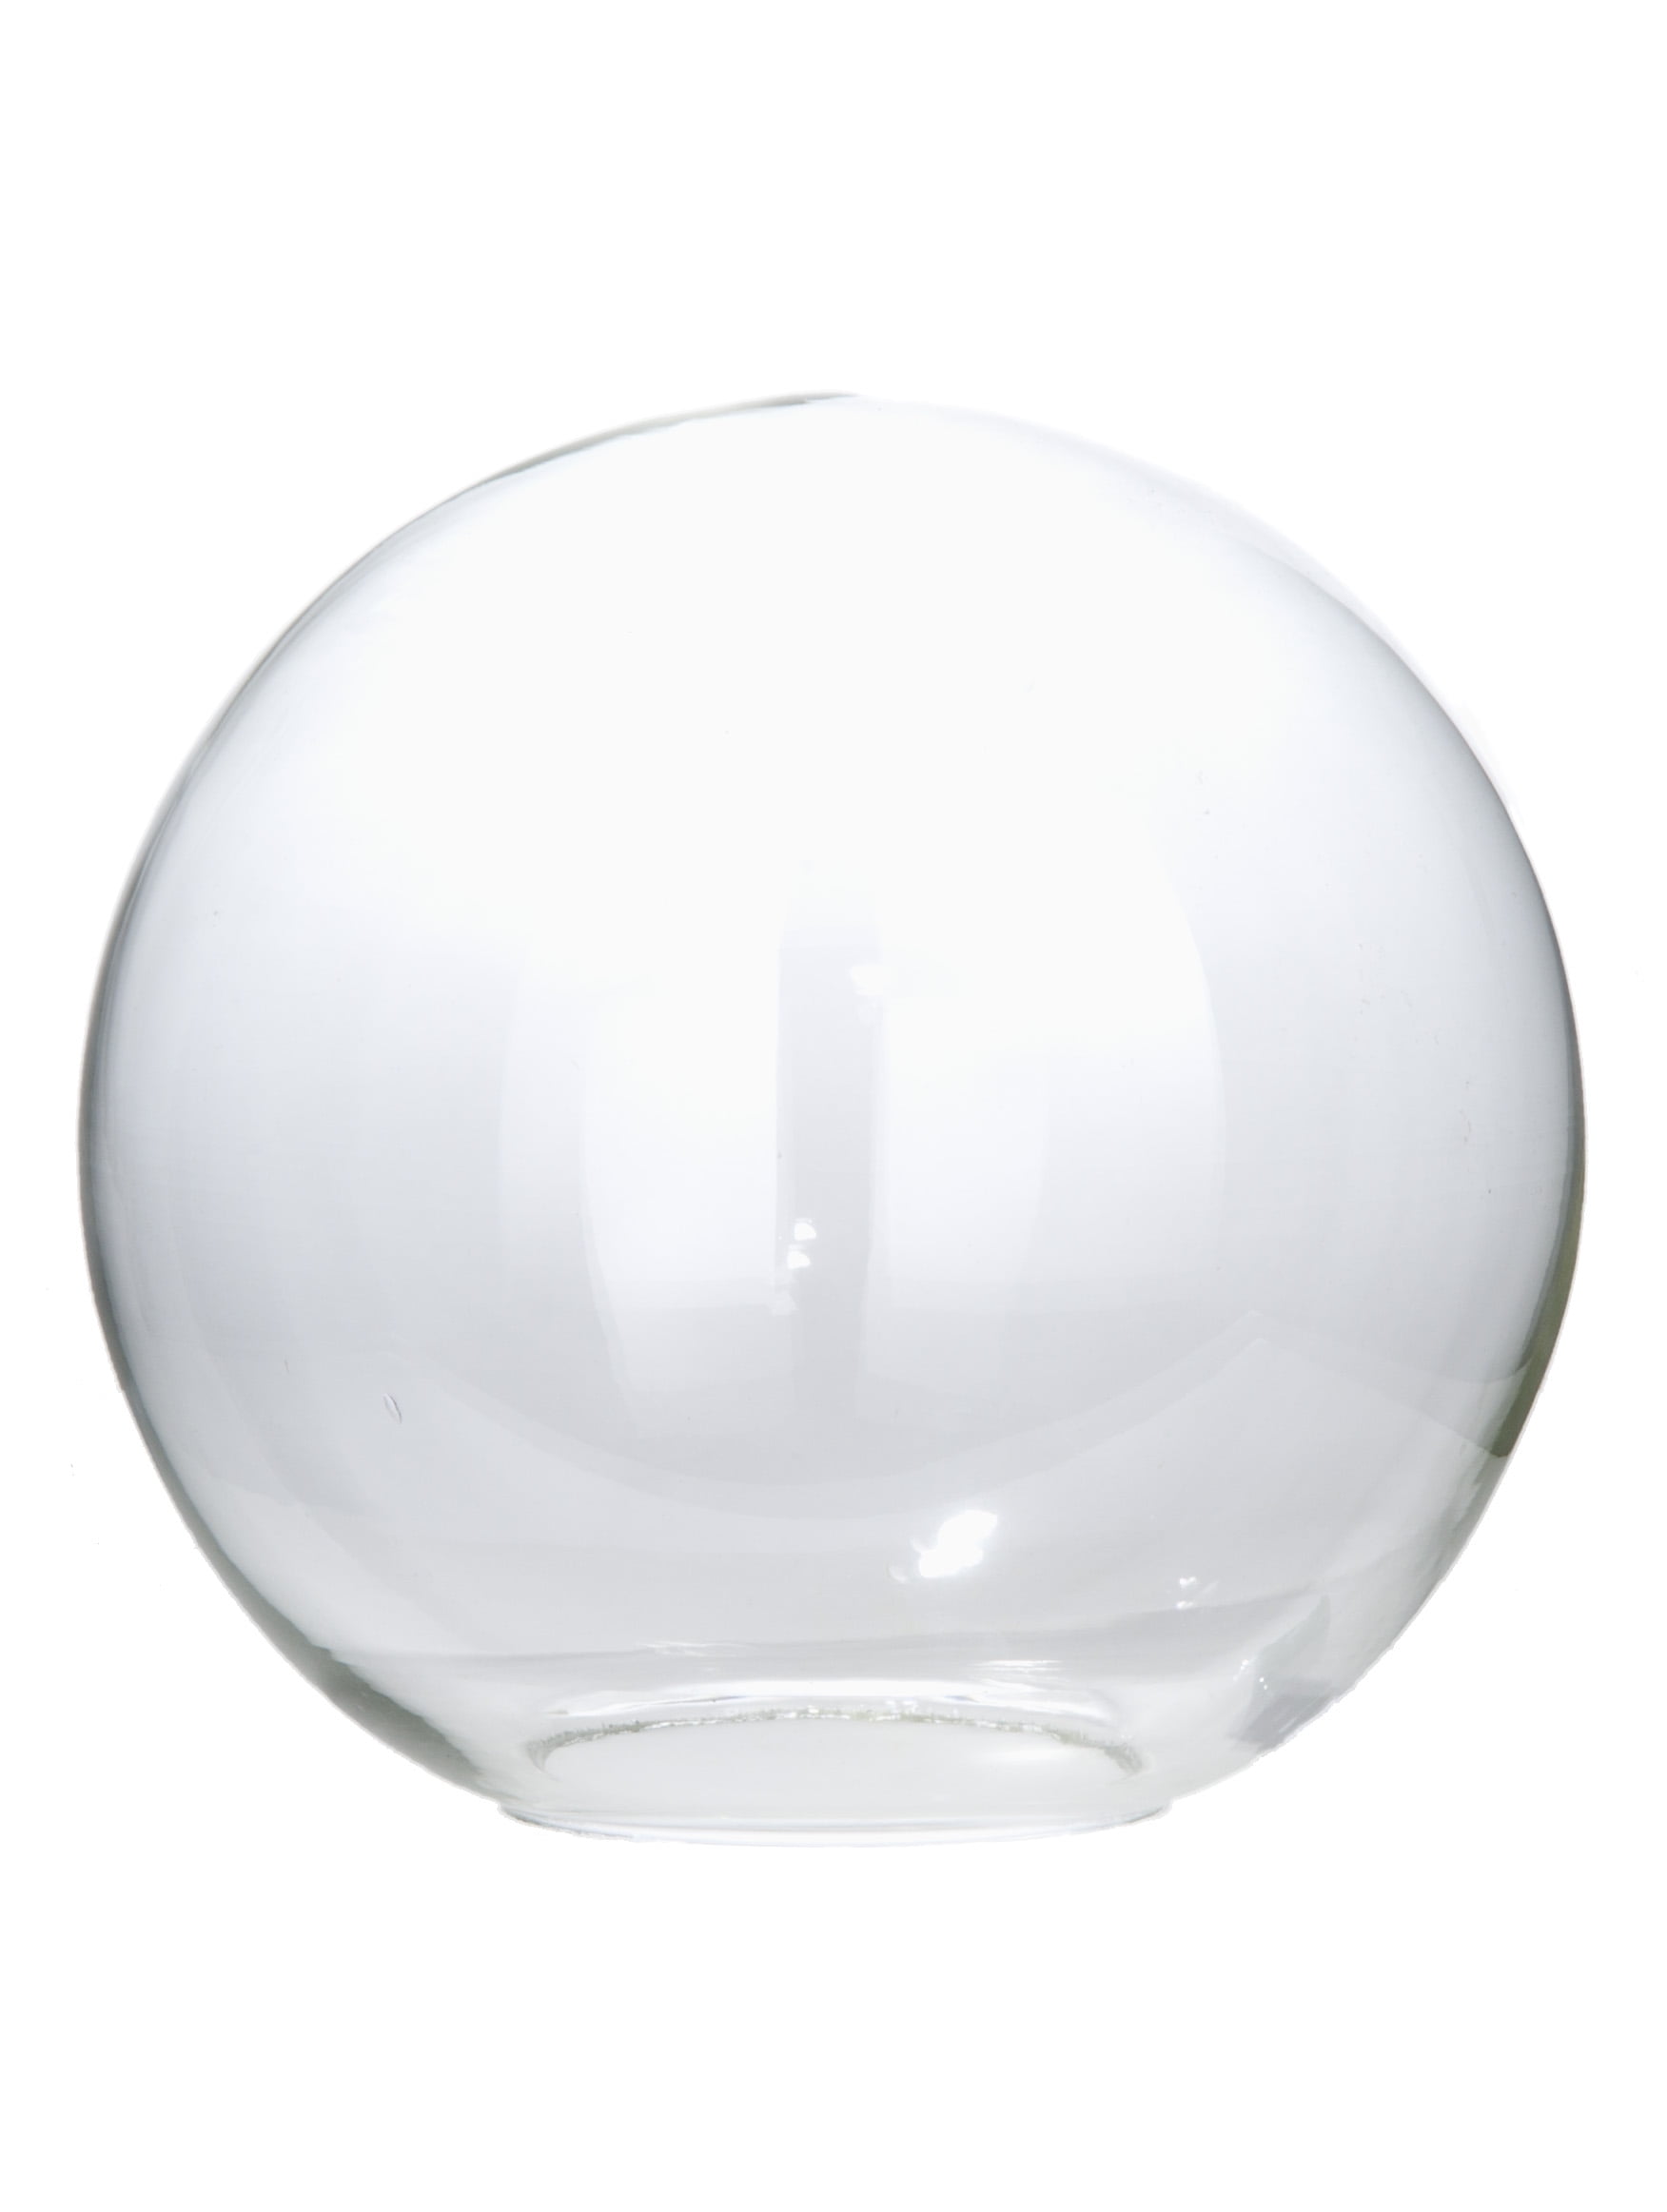 Replacement Glass Shades Cler Glass Globe 8-inch  In Diameter Fit 4-inch Fitter 